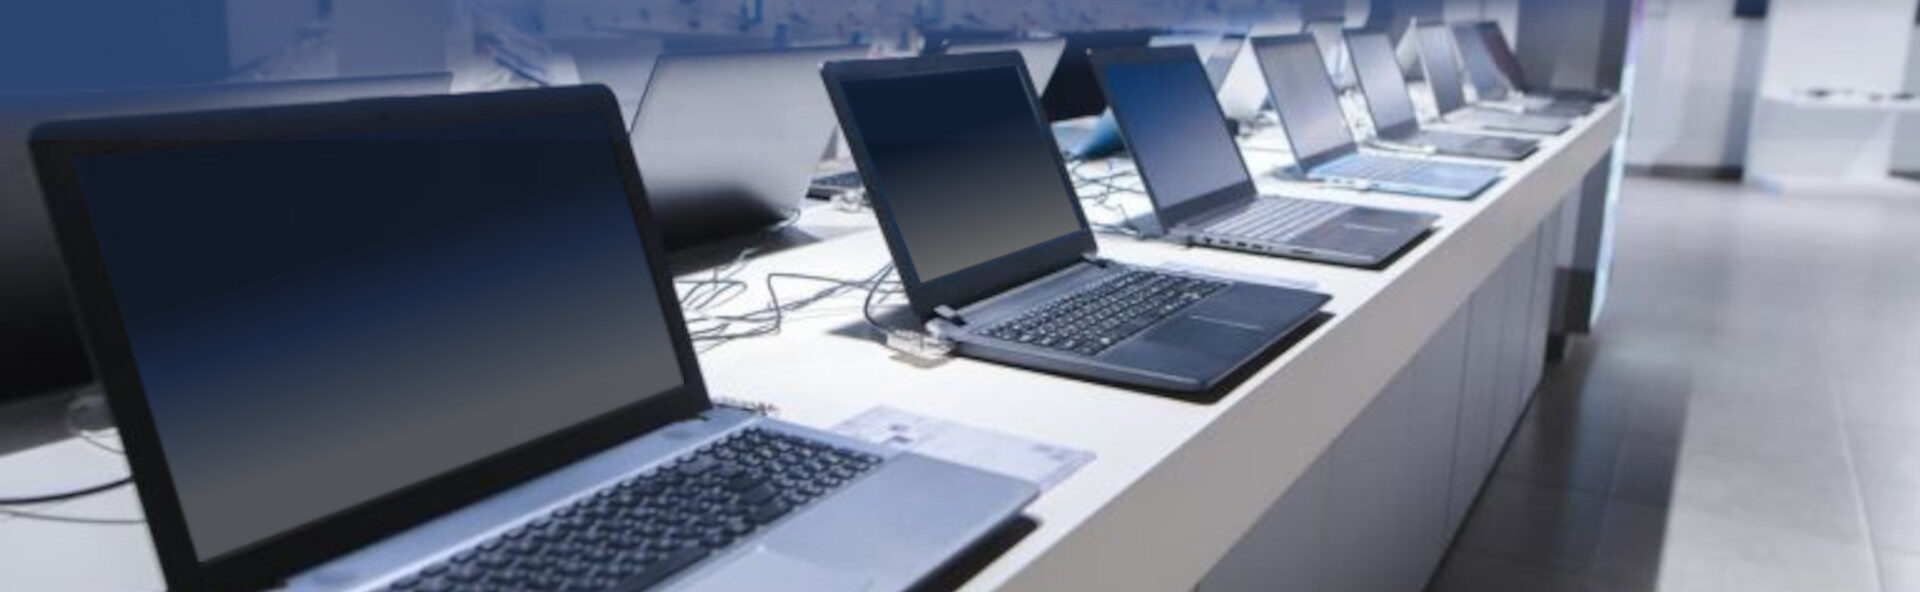 new-and-refurbished-laptops